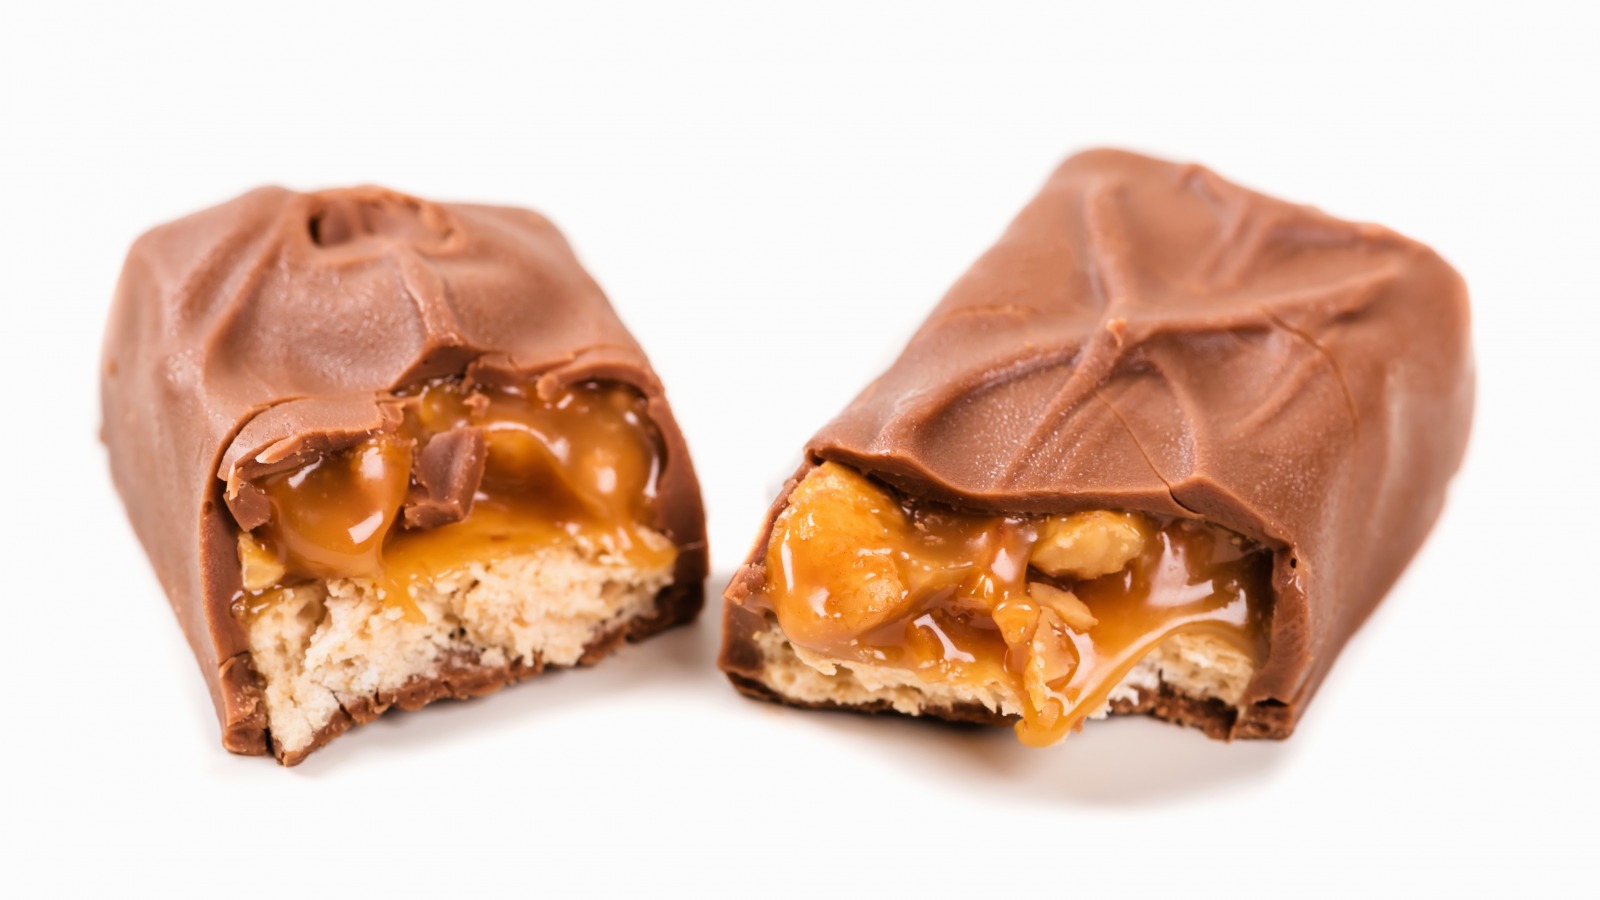 Snickers Bars – Nuts To You